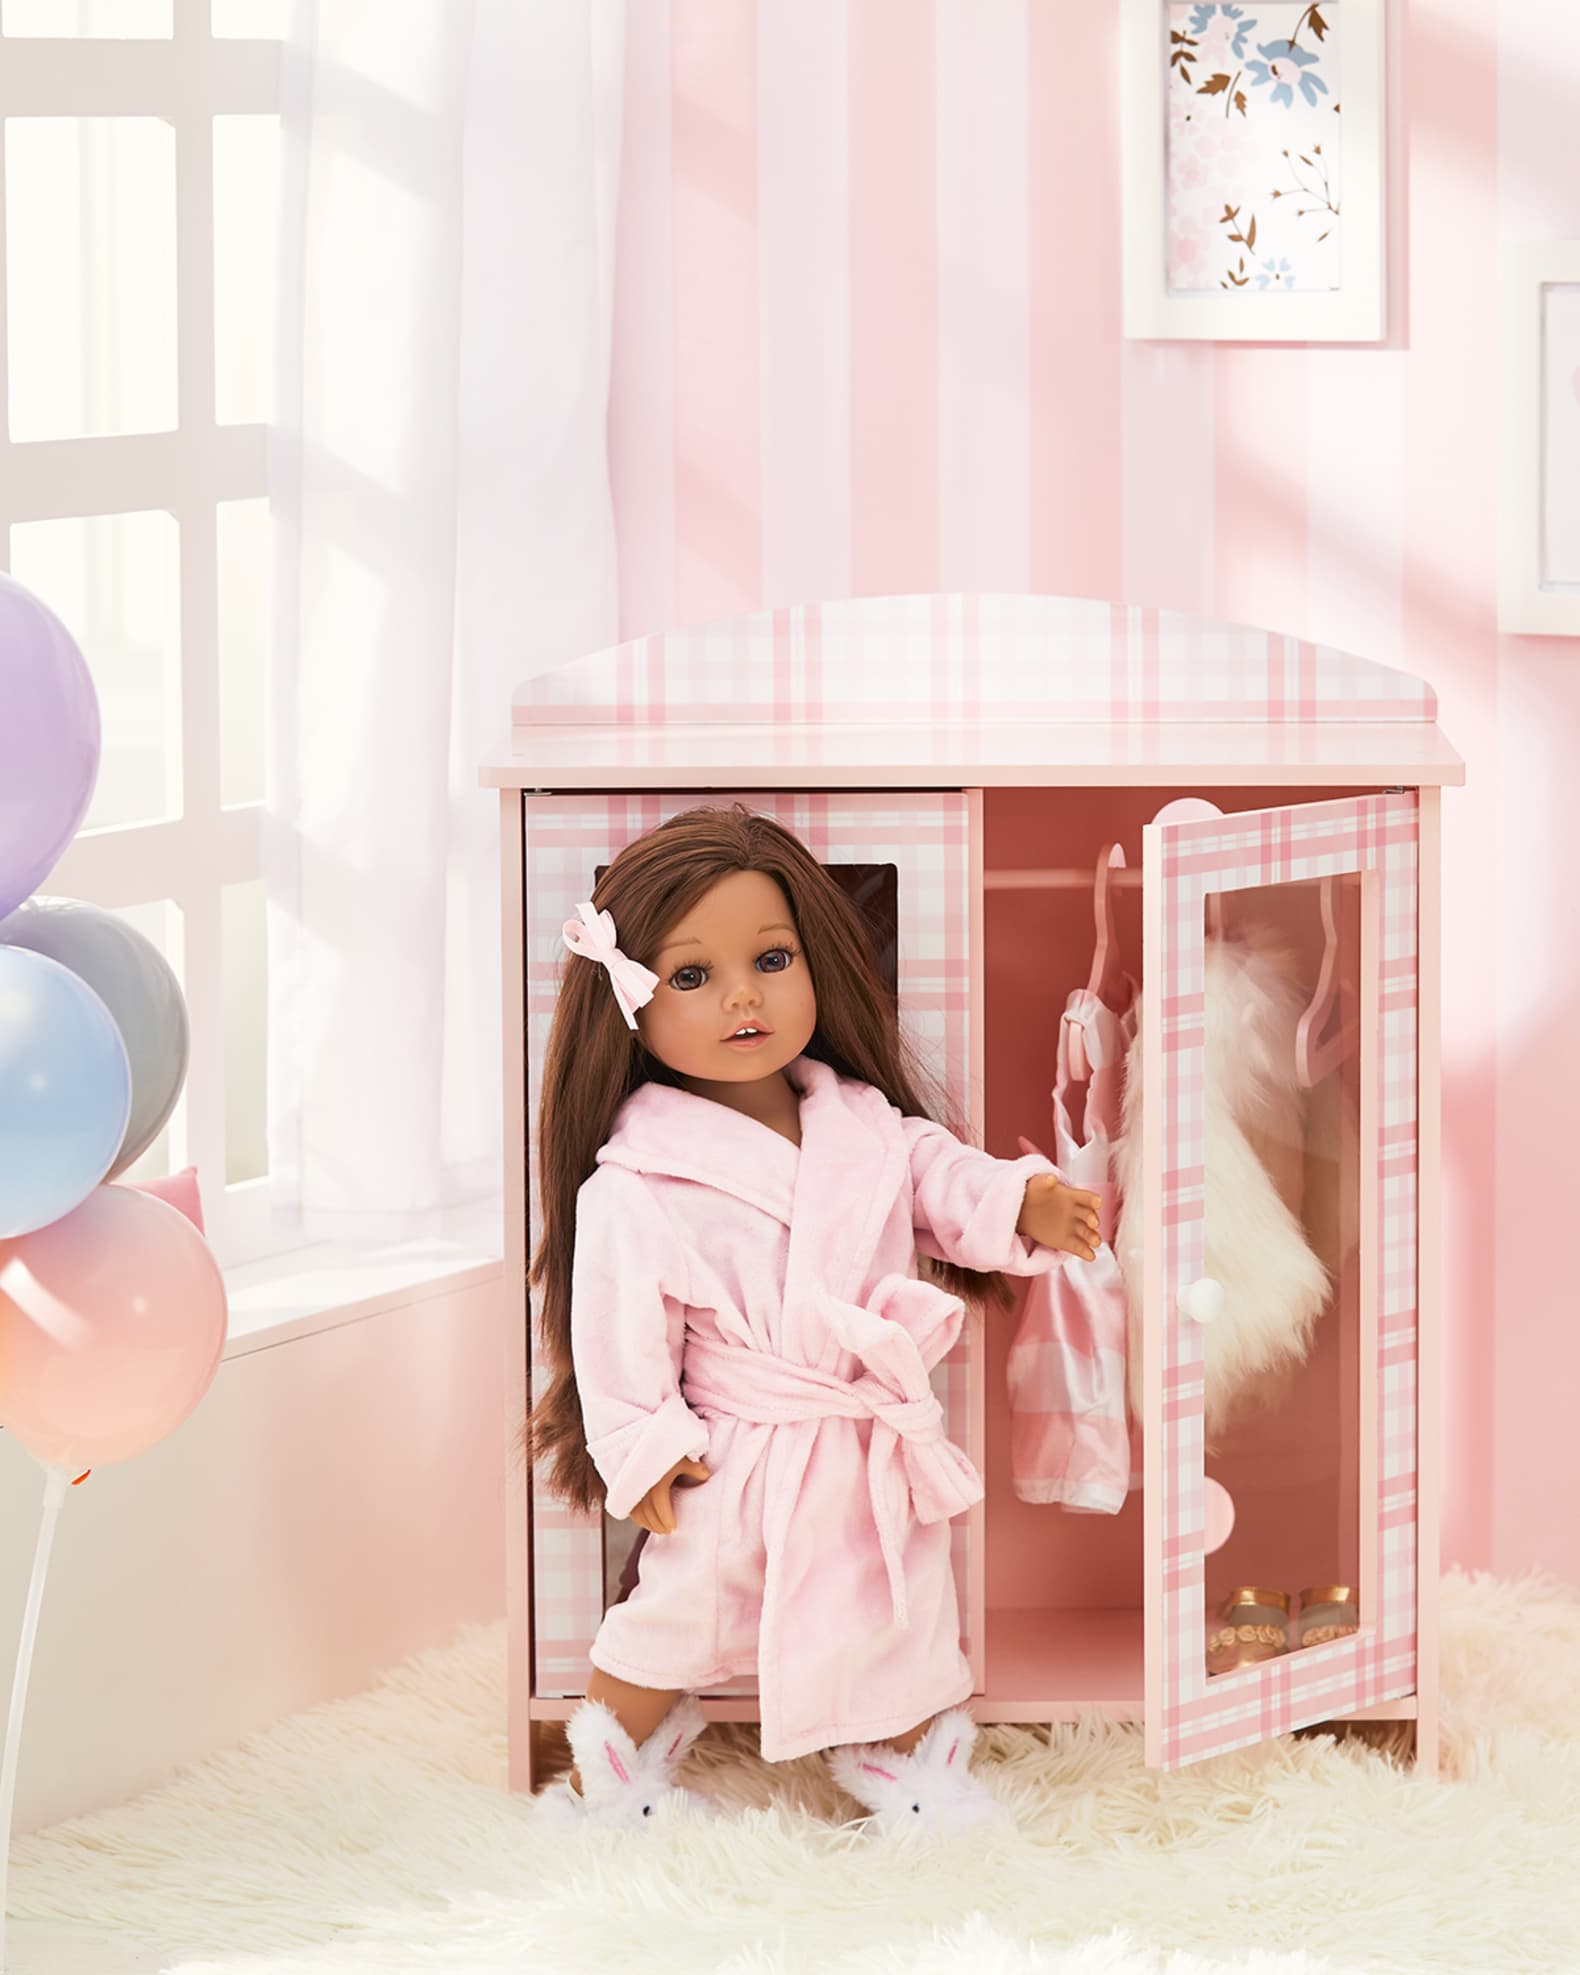 Louis Vuitton Created A New Dollhouse With Their Signature Monogrammed  Canvas Trunk - Covet Edition